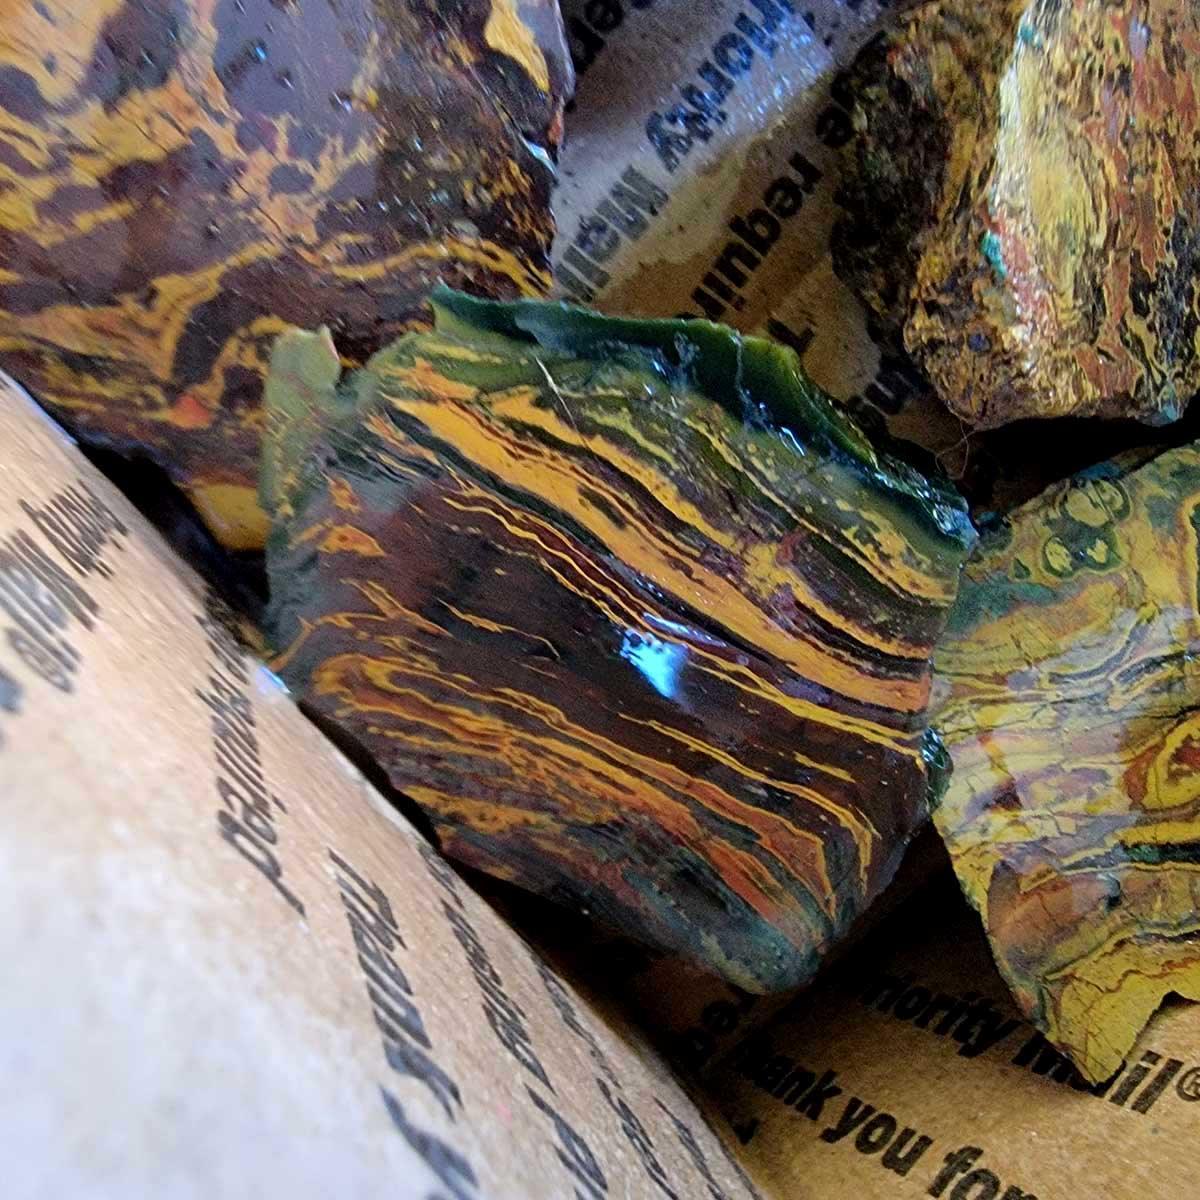 Overflowing High Grade Cut and Proven Kaleidoscope Jasper Flatrate! 24.5 lbs! - LapidaryCentral